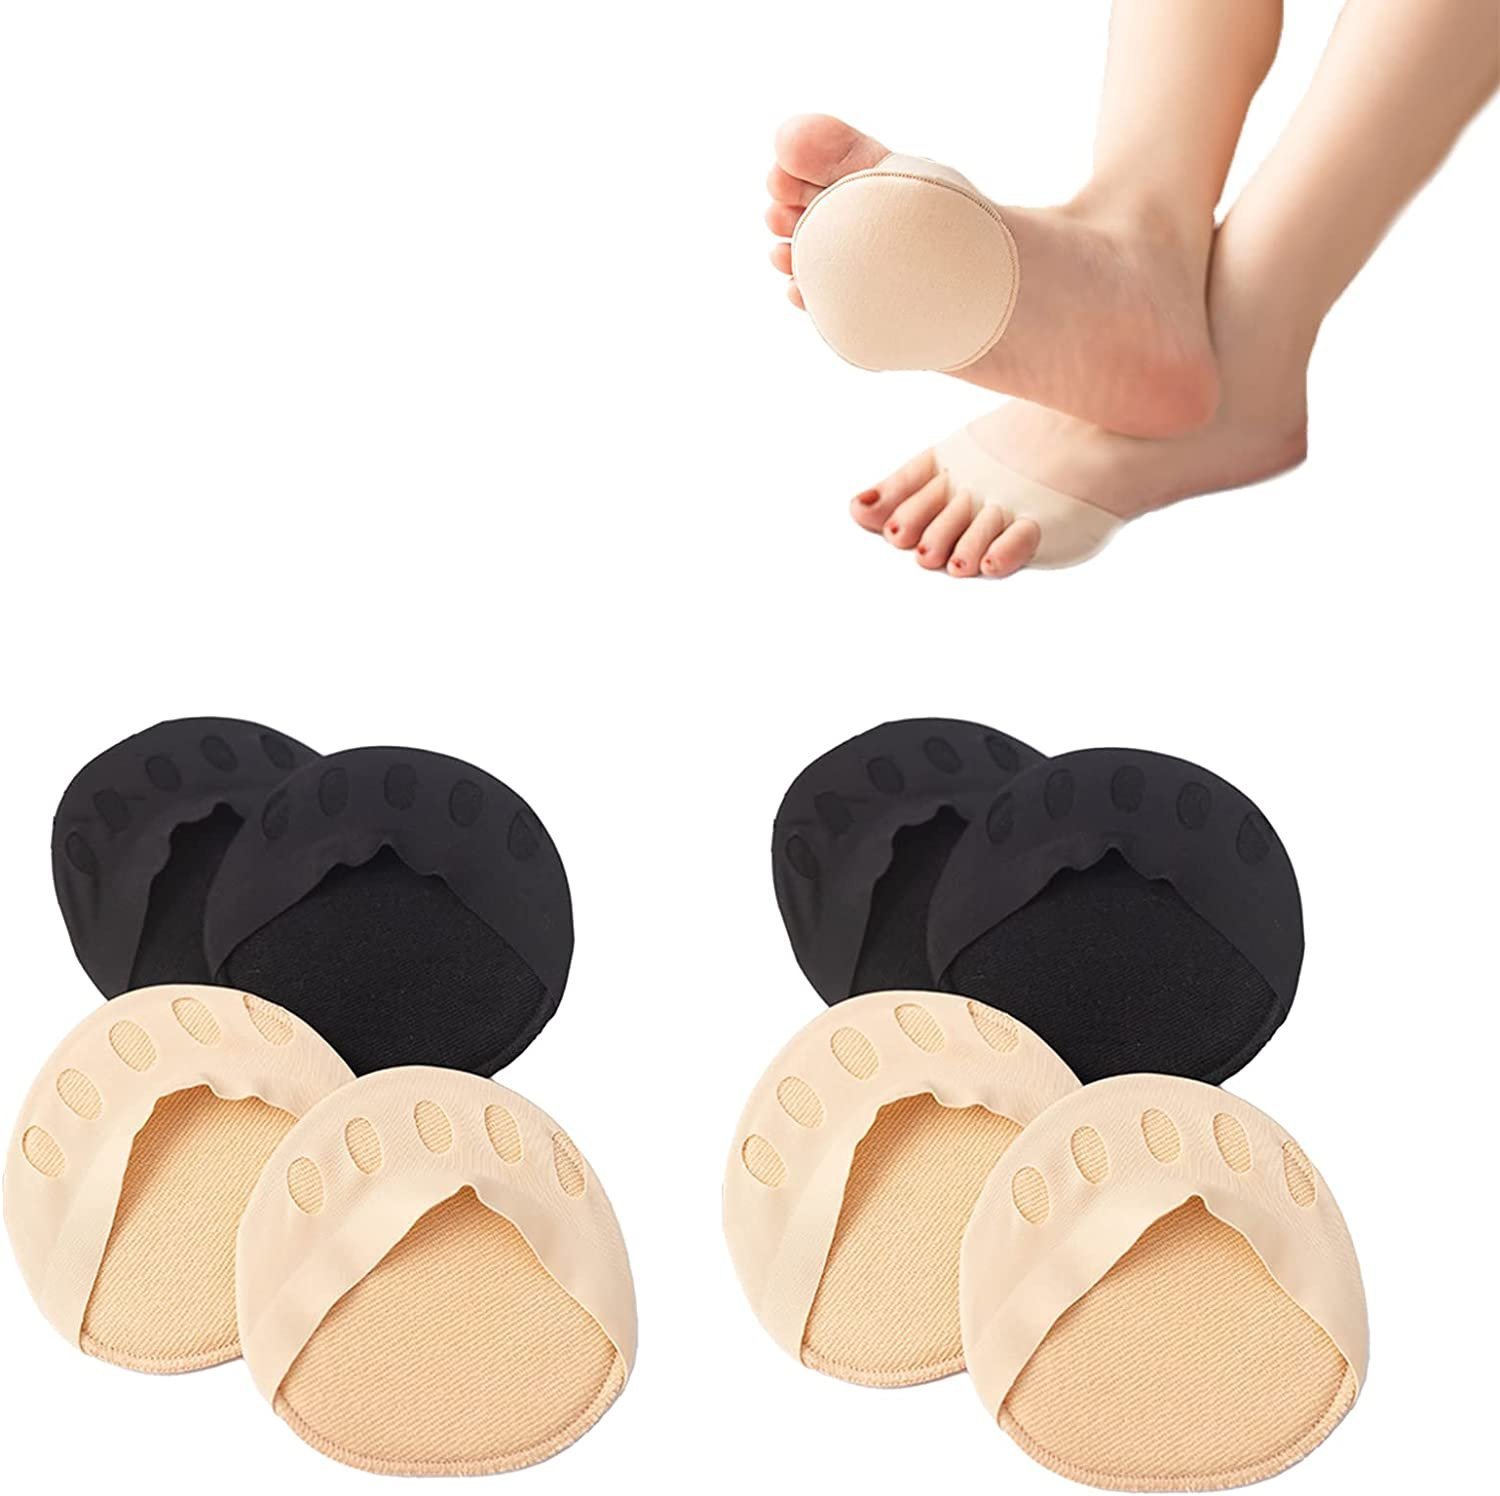 ( HOT SALE NOW-48% OFF) - Cushioning ice silk high heel insoles, BUY 2 GET 2FREE (12 Pairs)